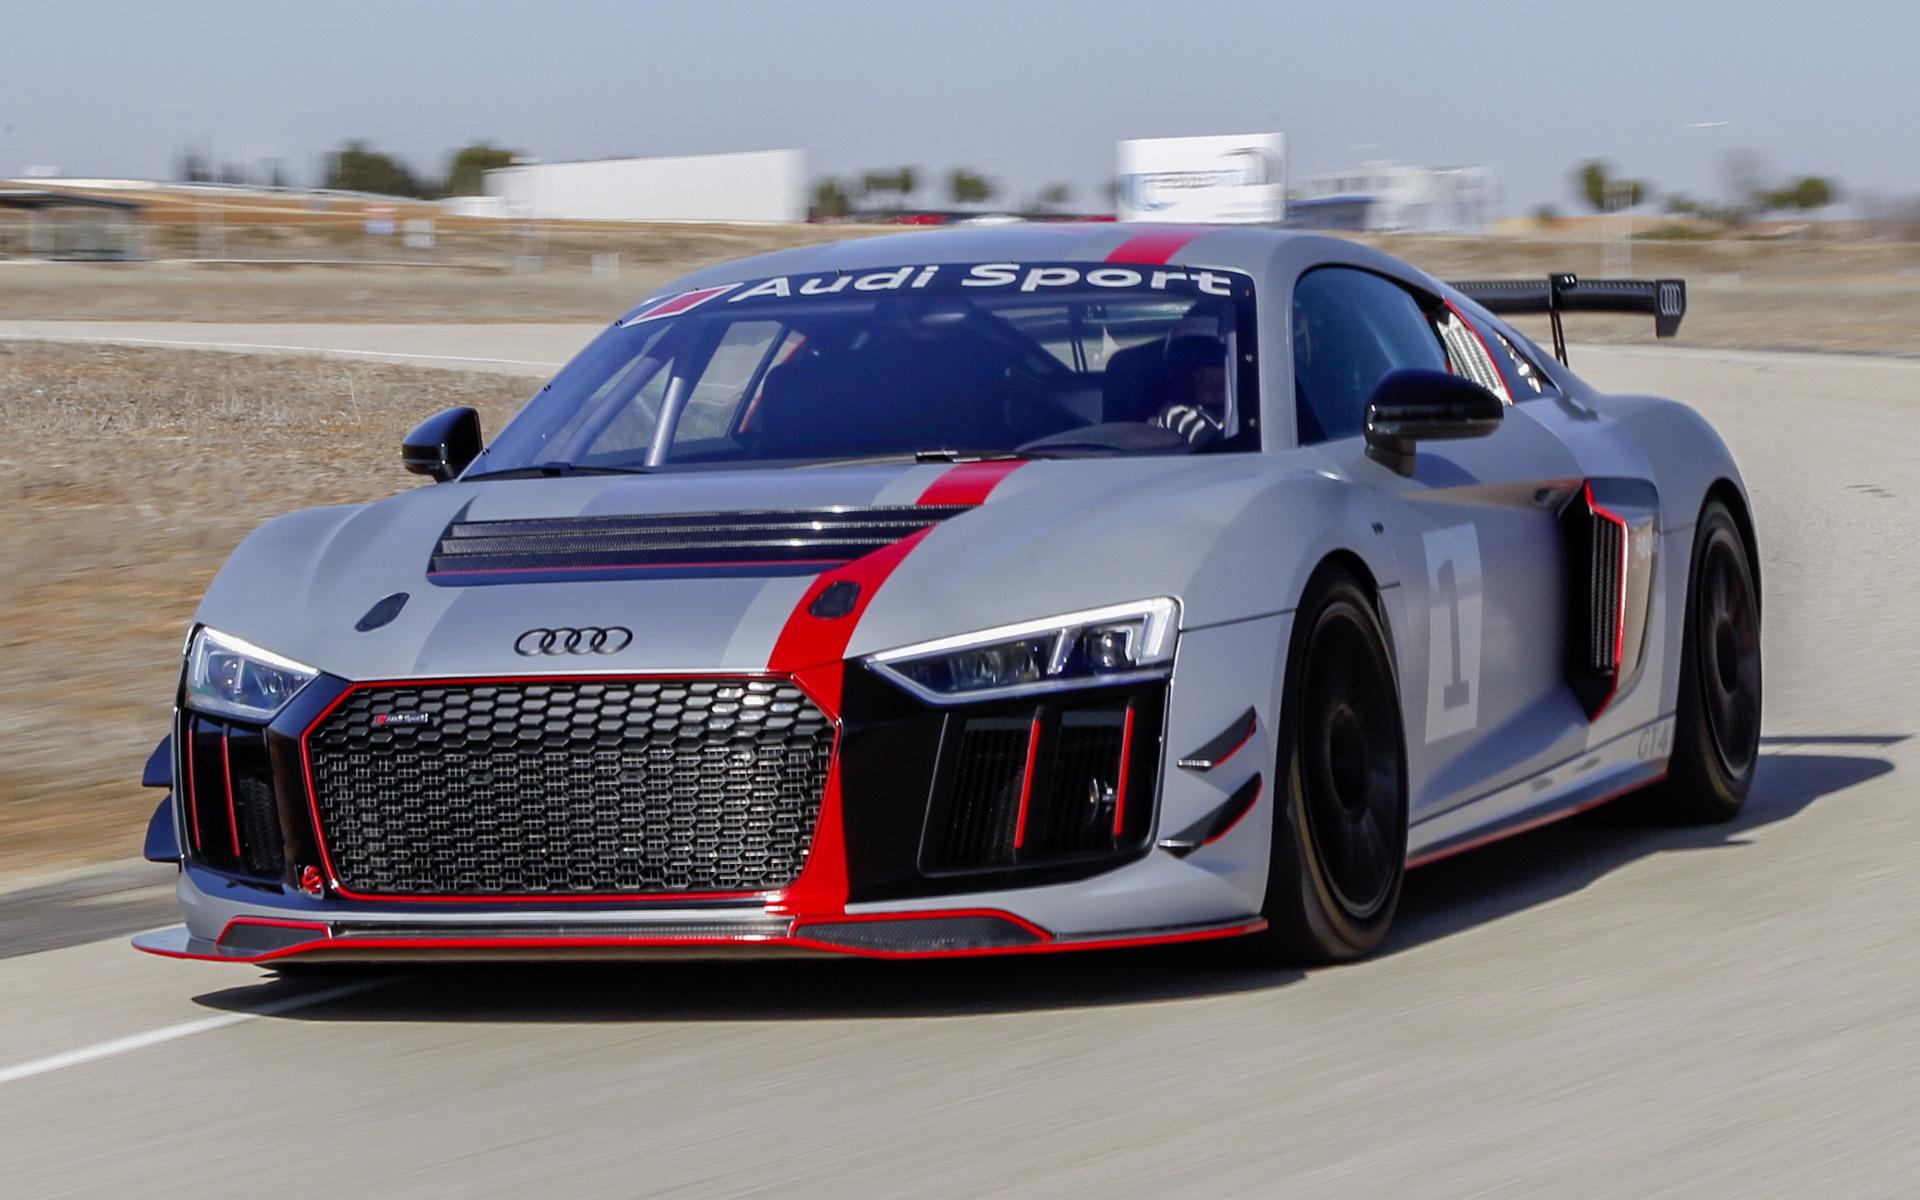 Audi R8 LMS GT4 and HD Image